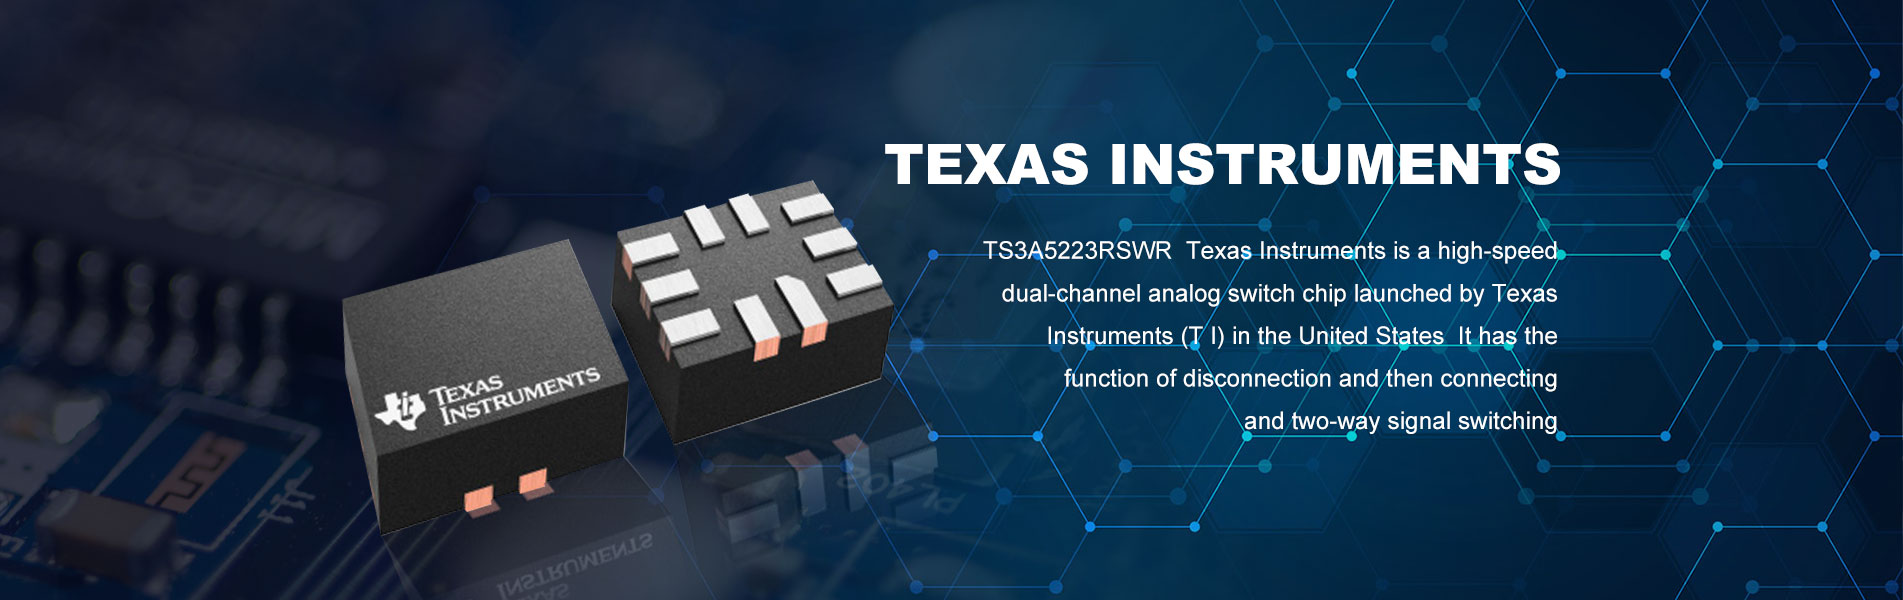 Texas Instruments Suppliers